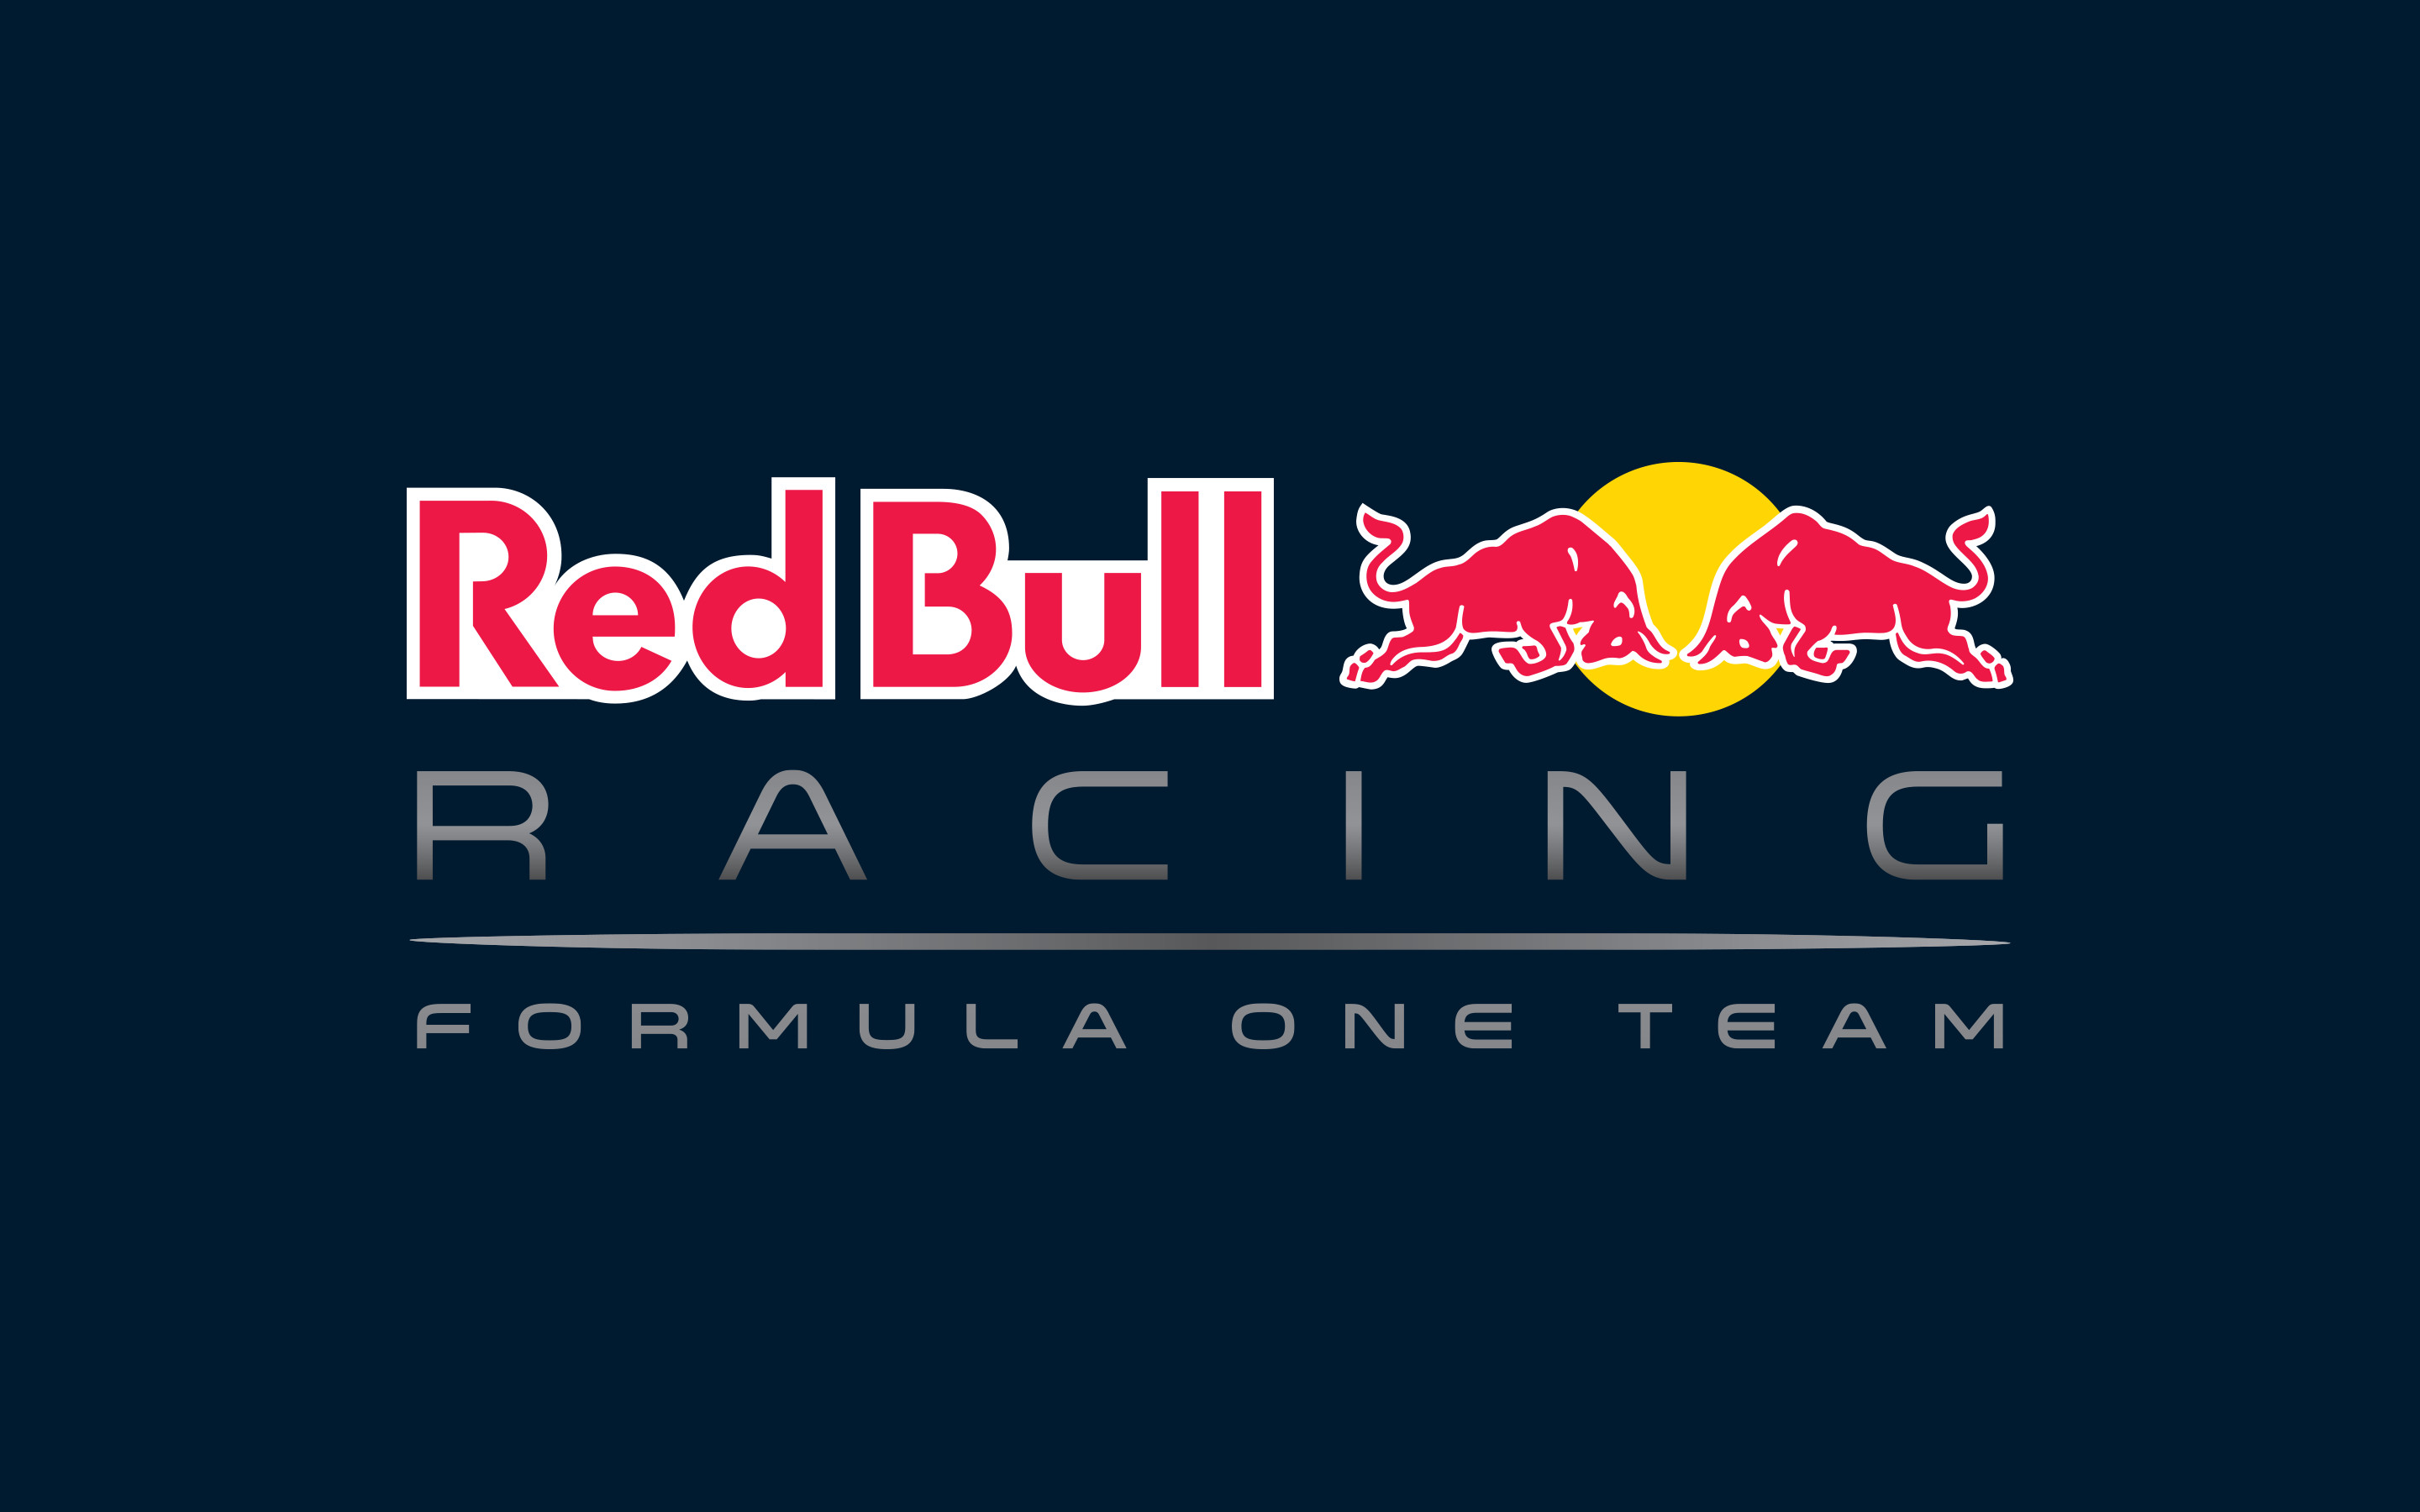 2880x1800 Media /r/allRed Bull sent me this wallpaper after I emailed them  complaining that I couldn't find a decent size online. They didn't say I  couldn't share it.